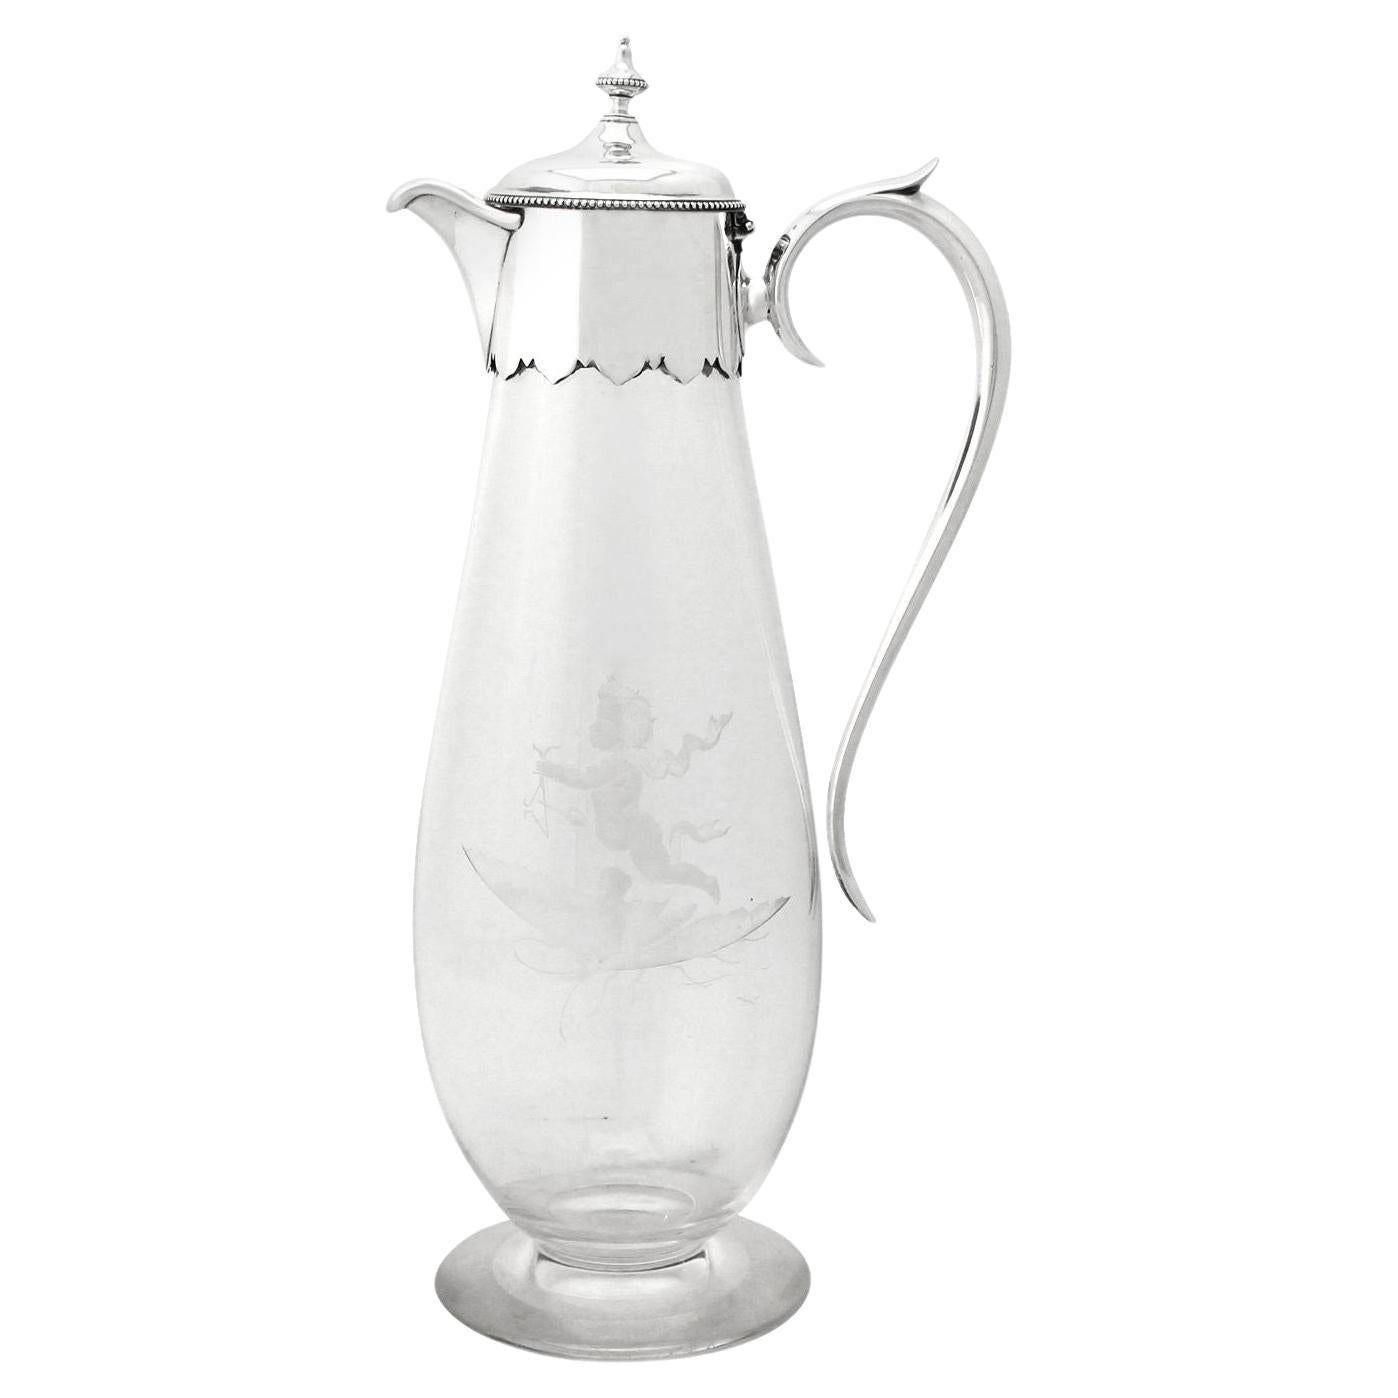 19th Century Antique Victorian Glass and Sterling Silver-Mounted Claret Jug For Sale